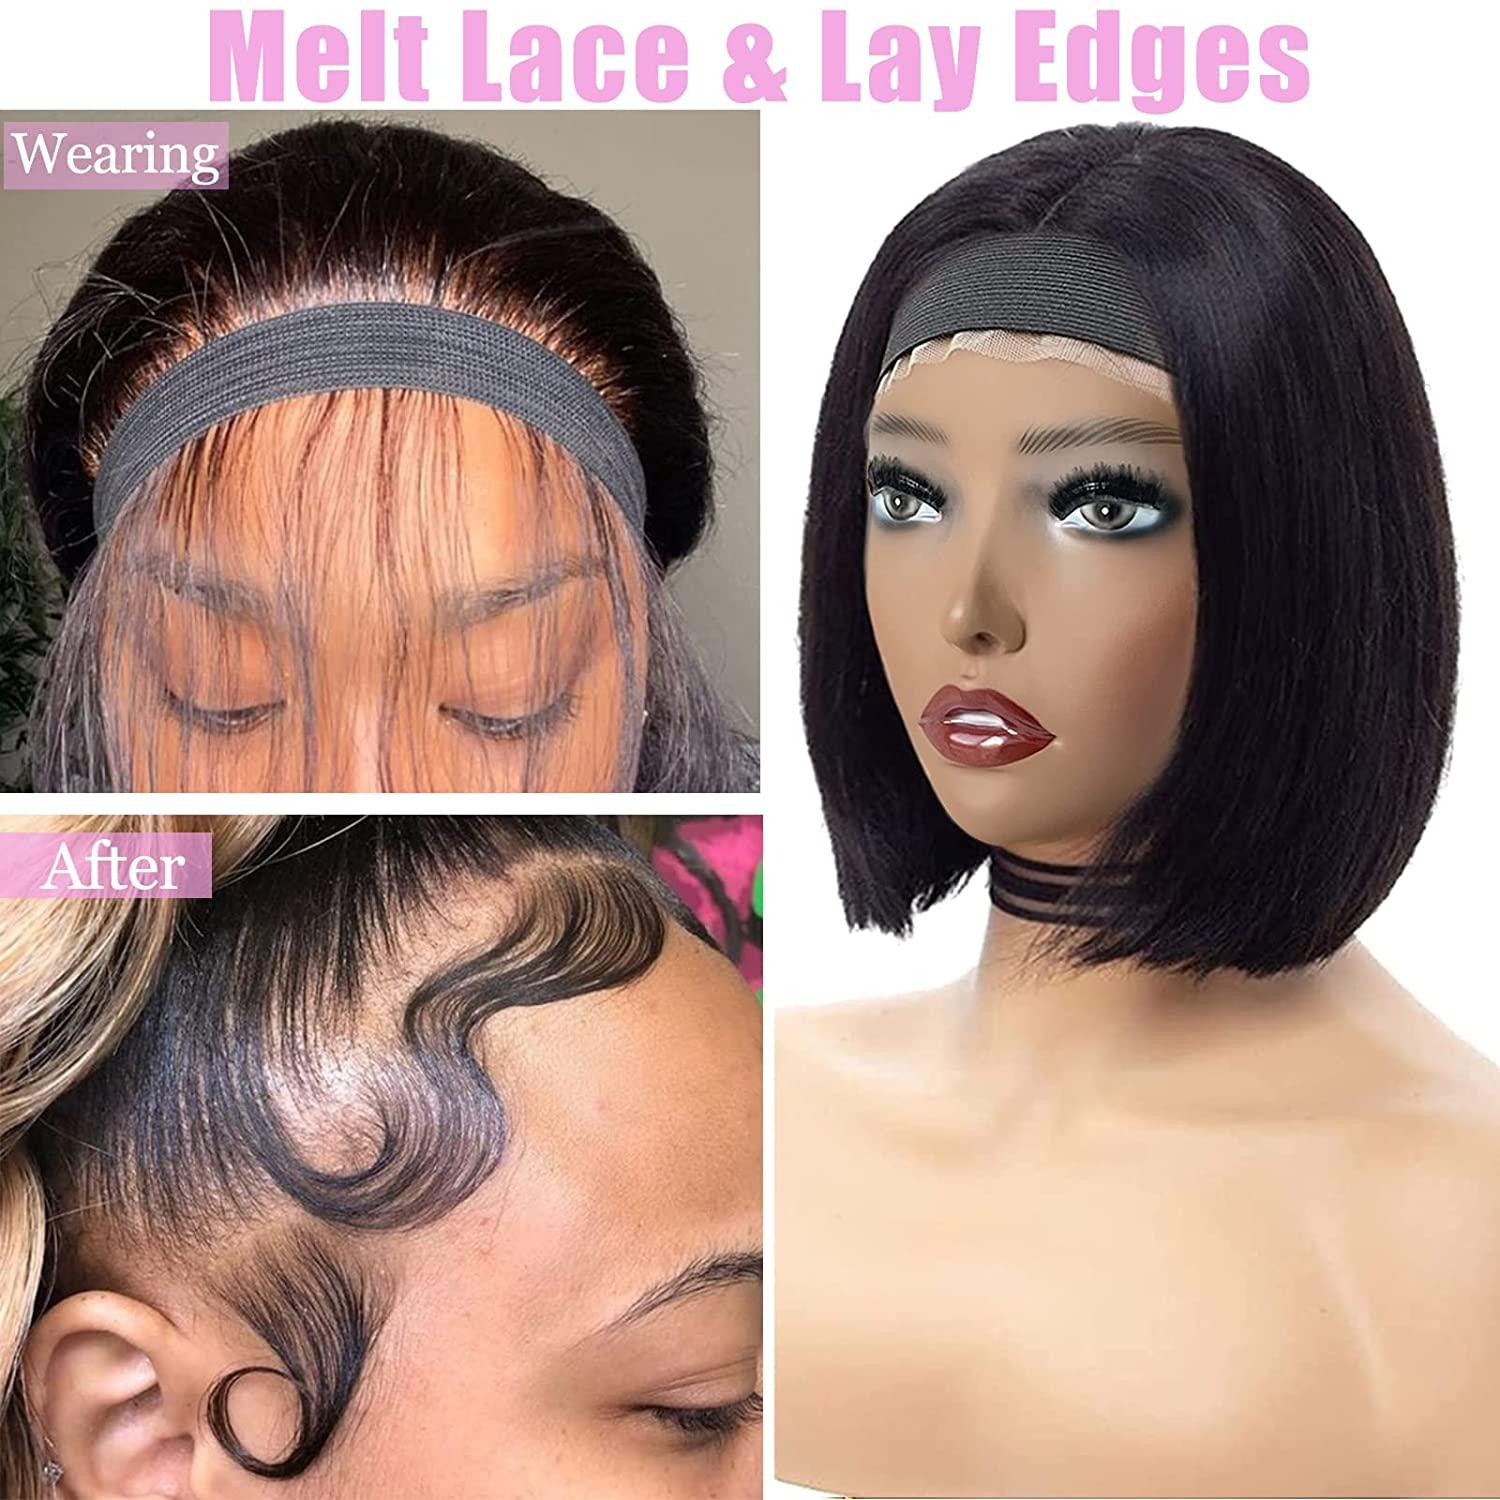 Melting Band for Lace Wigs Elastic Edge Wrap